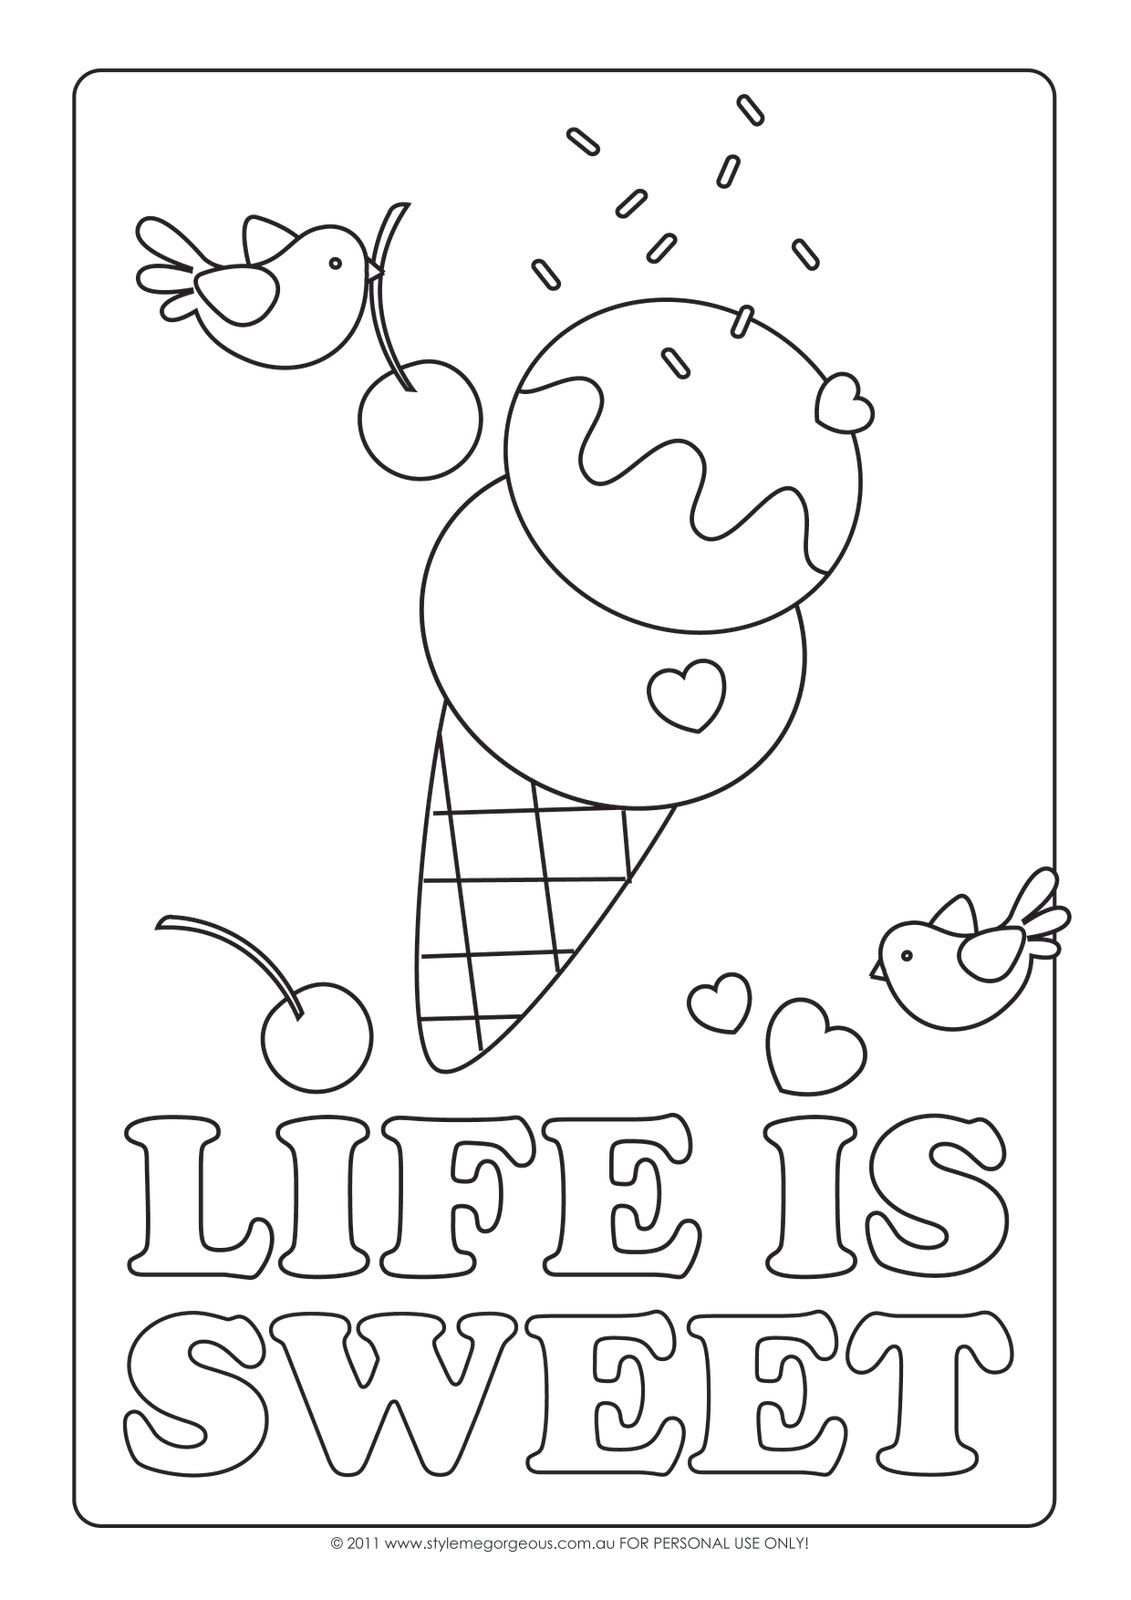 Style Me Gorgeous: Life Is Sweet - Free Coloring Page | Ice cream ...